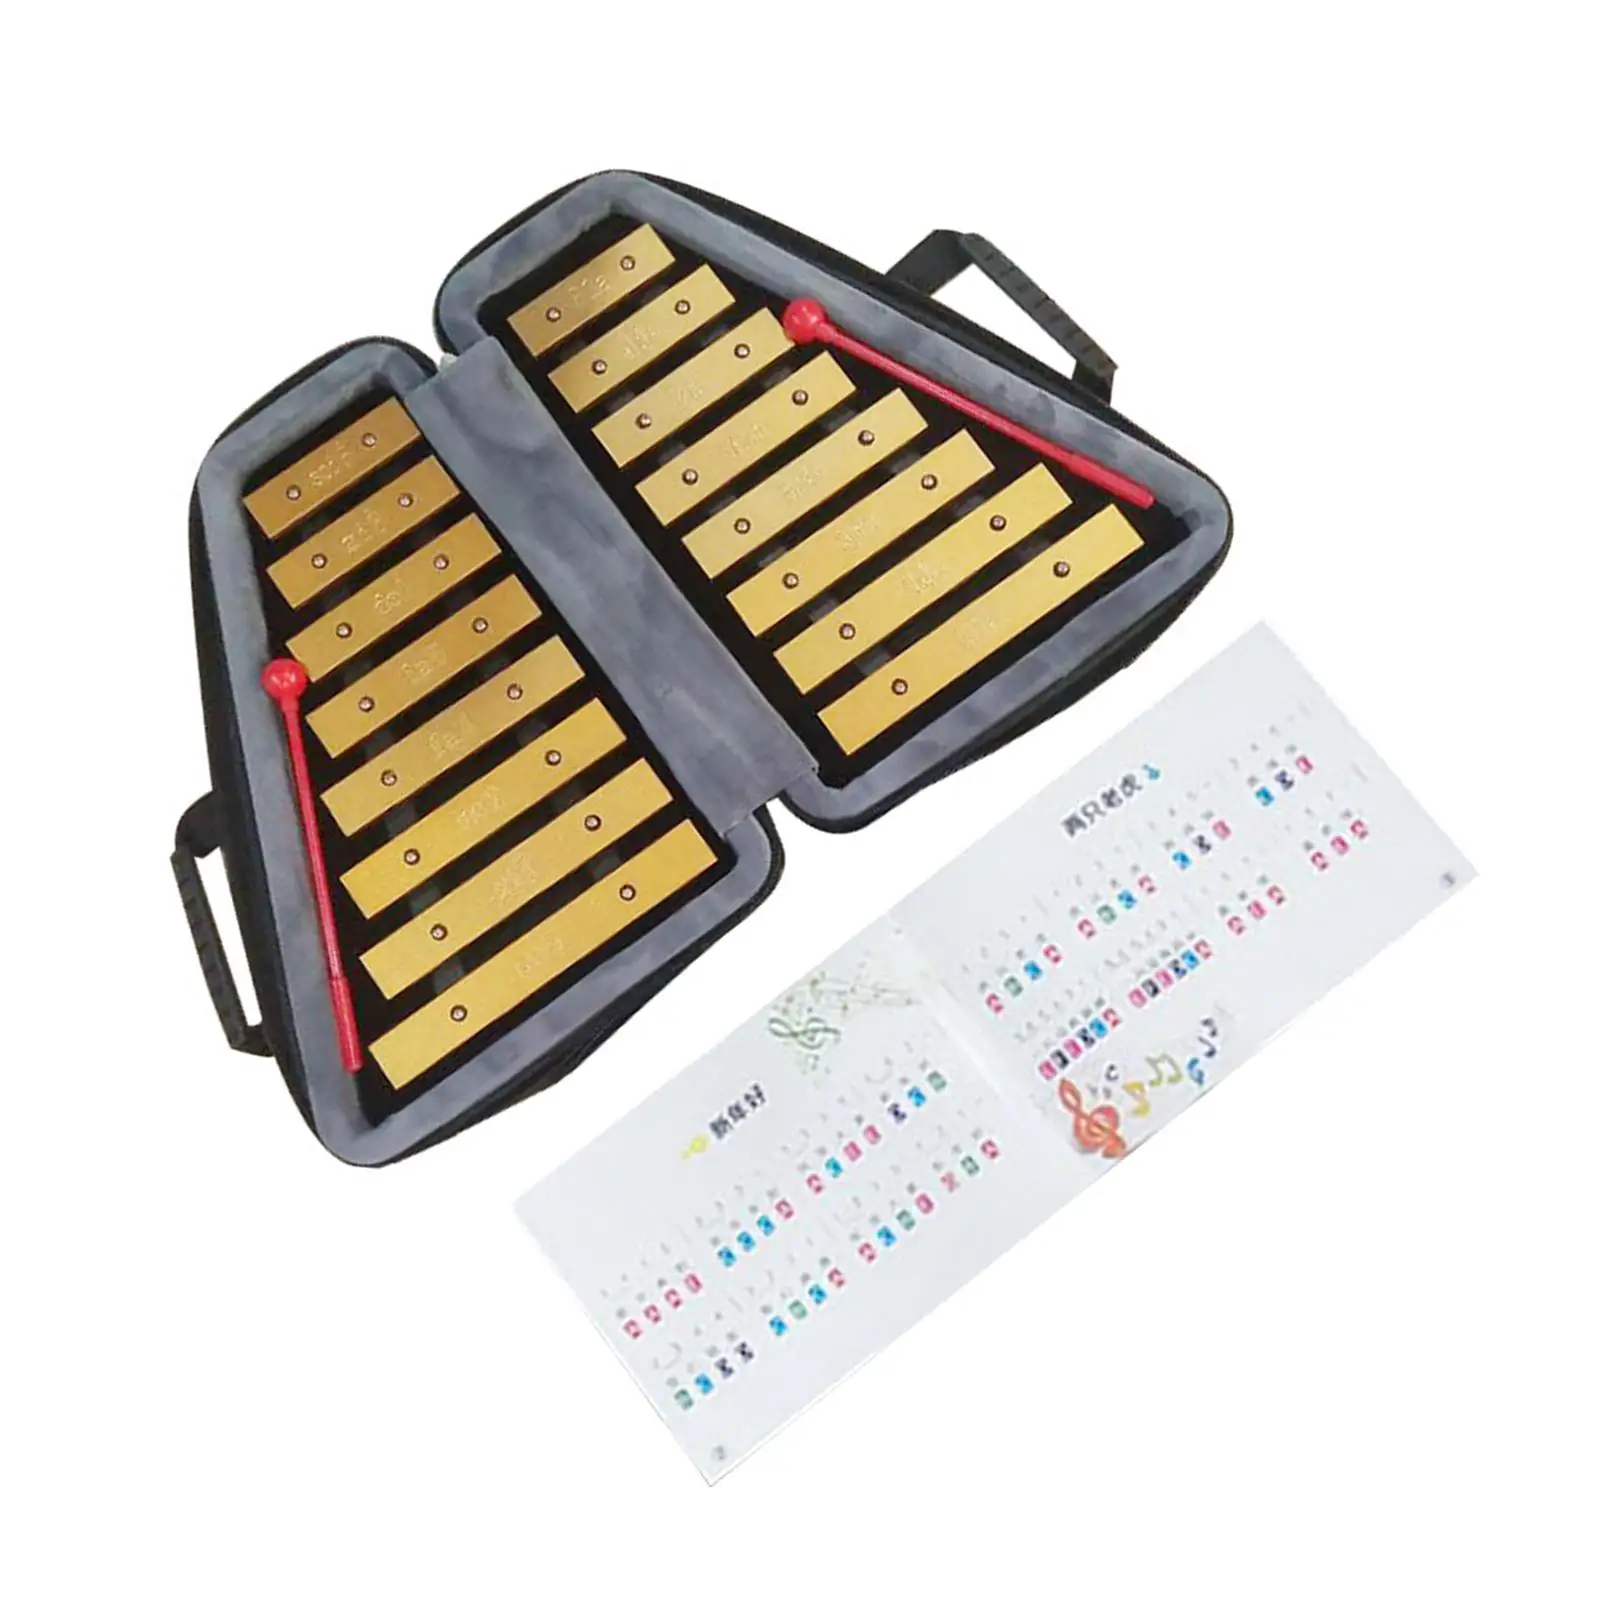 16 Note Glockenspiel Coordination Motor Skill Hand Knock Piano Toy for Live Performance Concert School Orchestras Outside Home